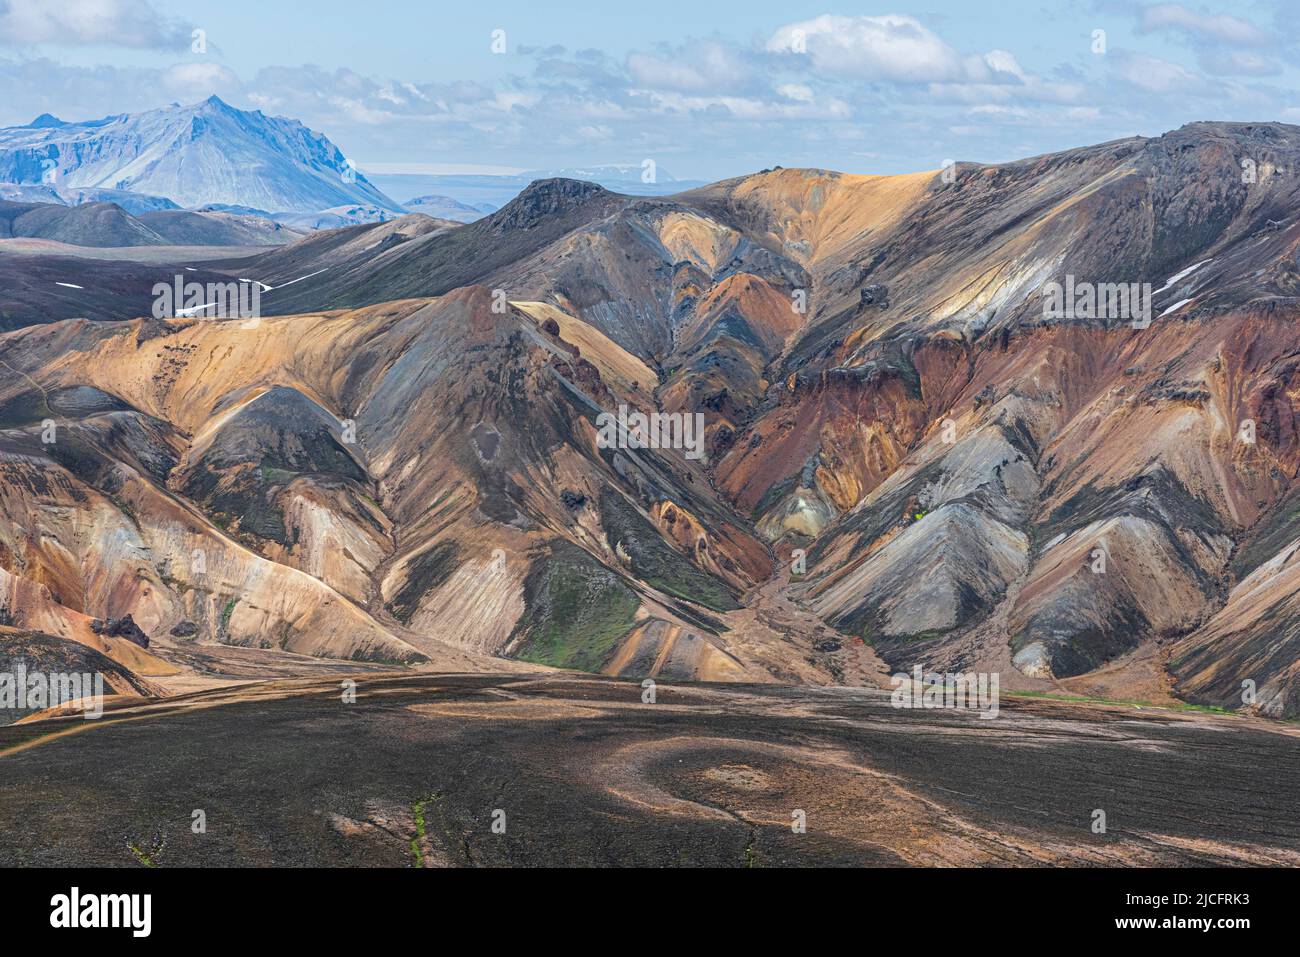 Laugavegur hiking trail is the most famous multi-day trekking tour in Iceland. Landscape shot from the area around Landmannalaugar, starting point of the long-distance hiking trail in the highlands of Iceland. Erosion circle in the foreground. Stock Photo